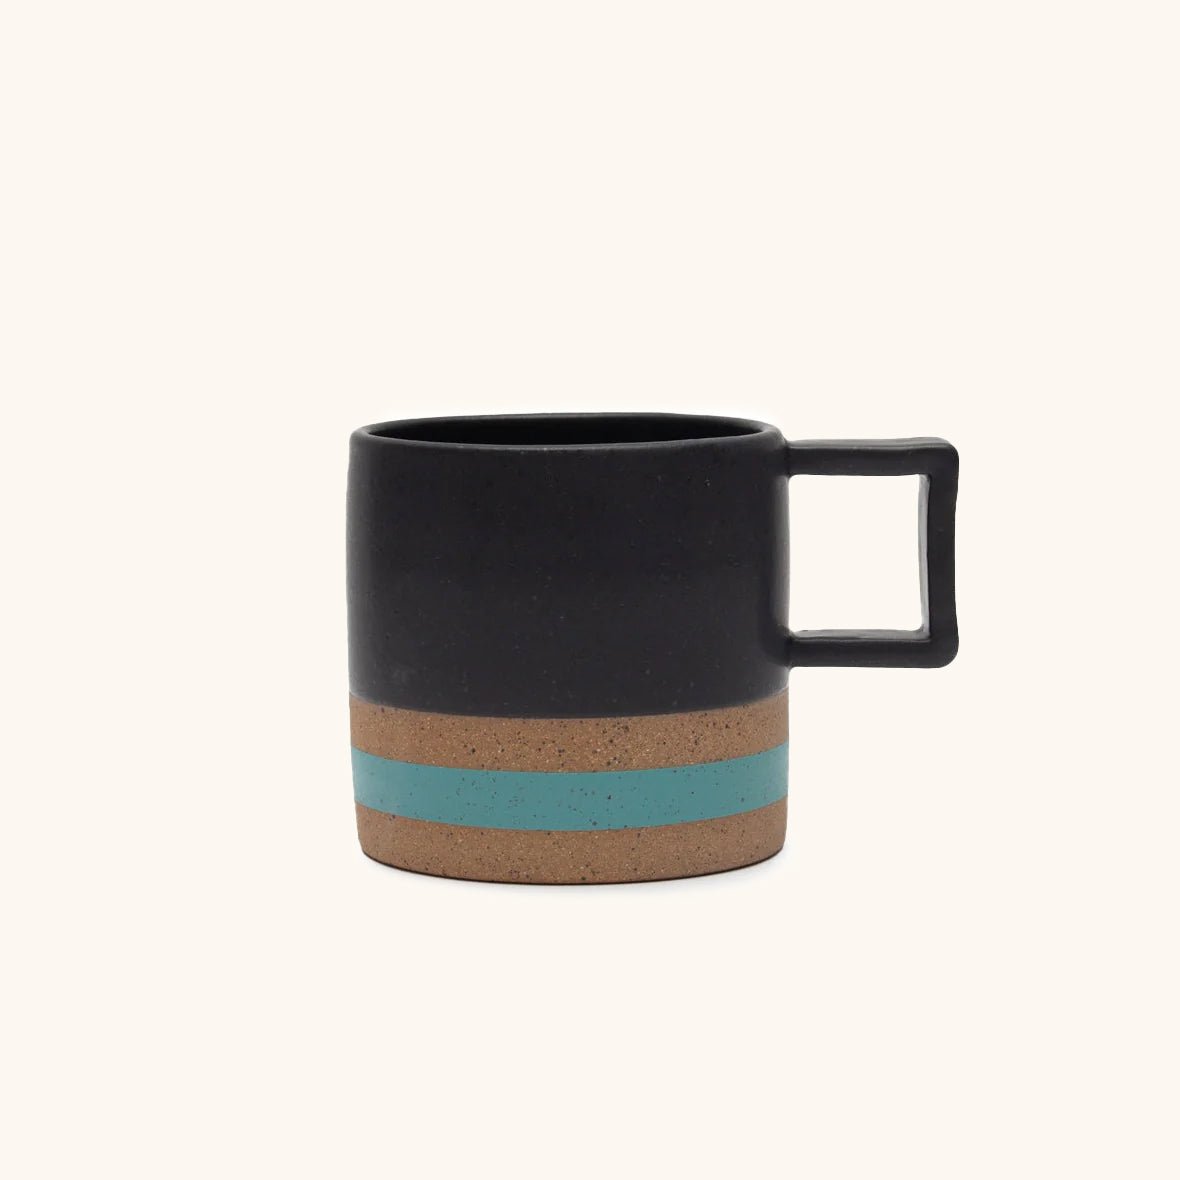 Handle Mug with black satin glaze and turquoise stripe. Made in Hood River, Oregon by Wolf Ceramics.